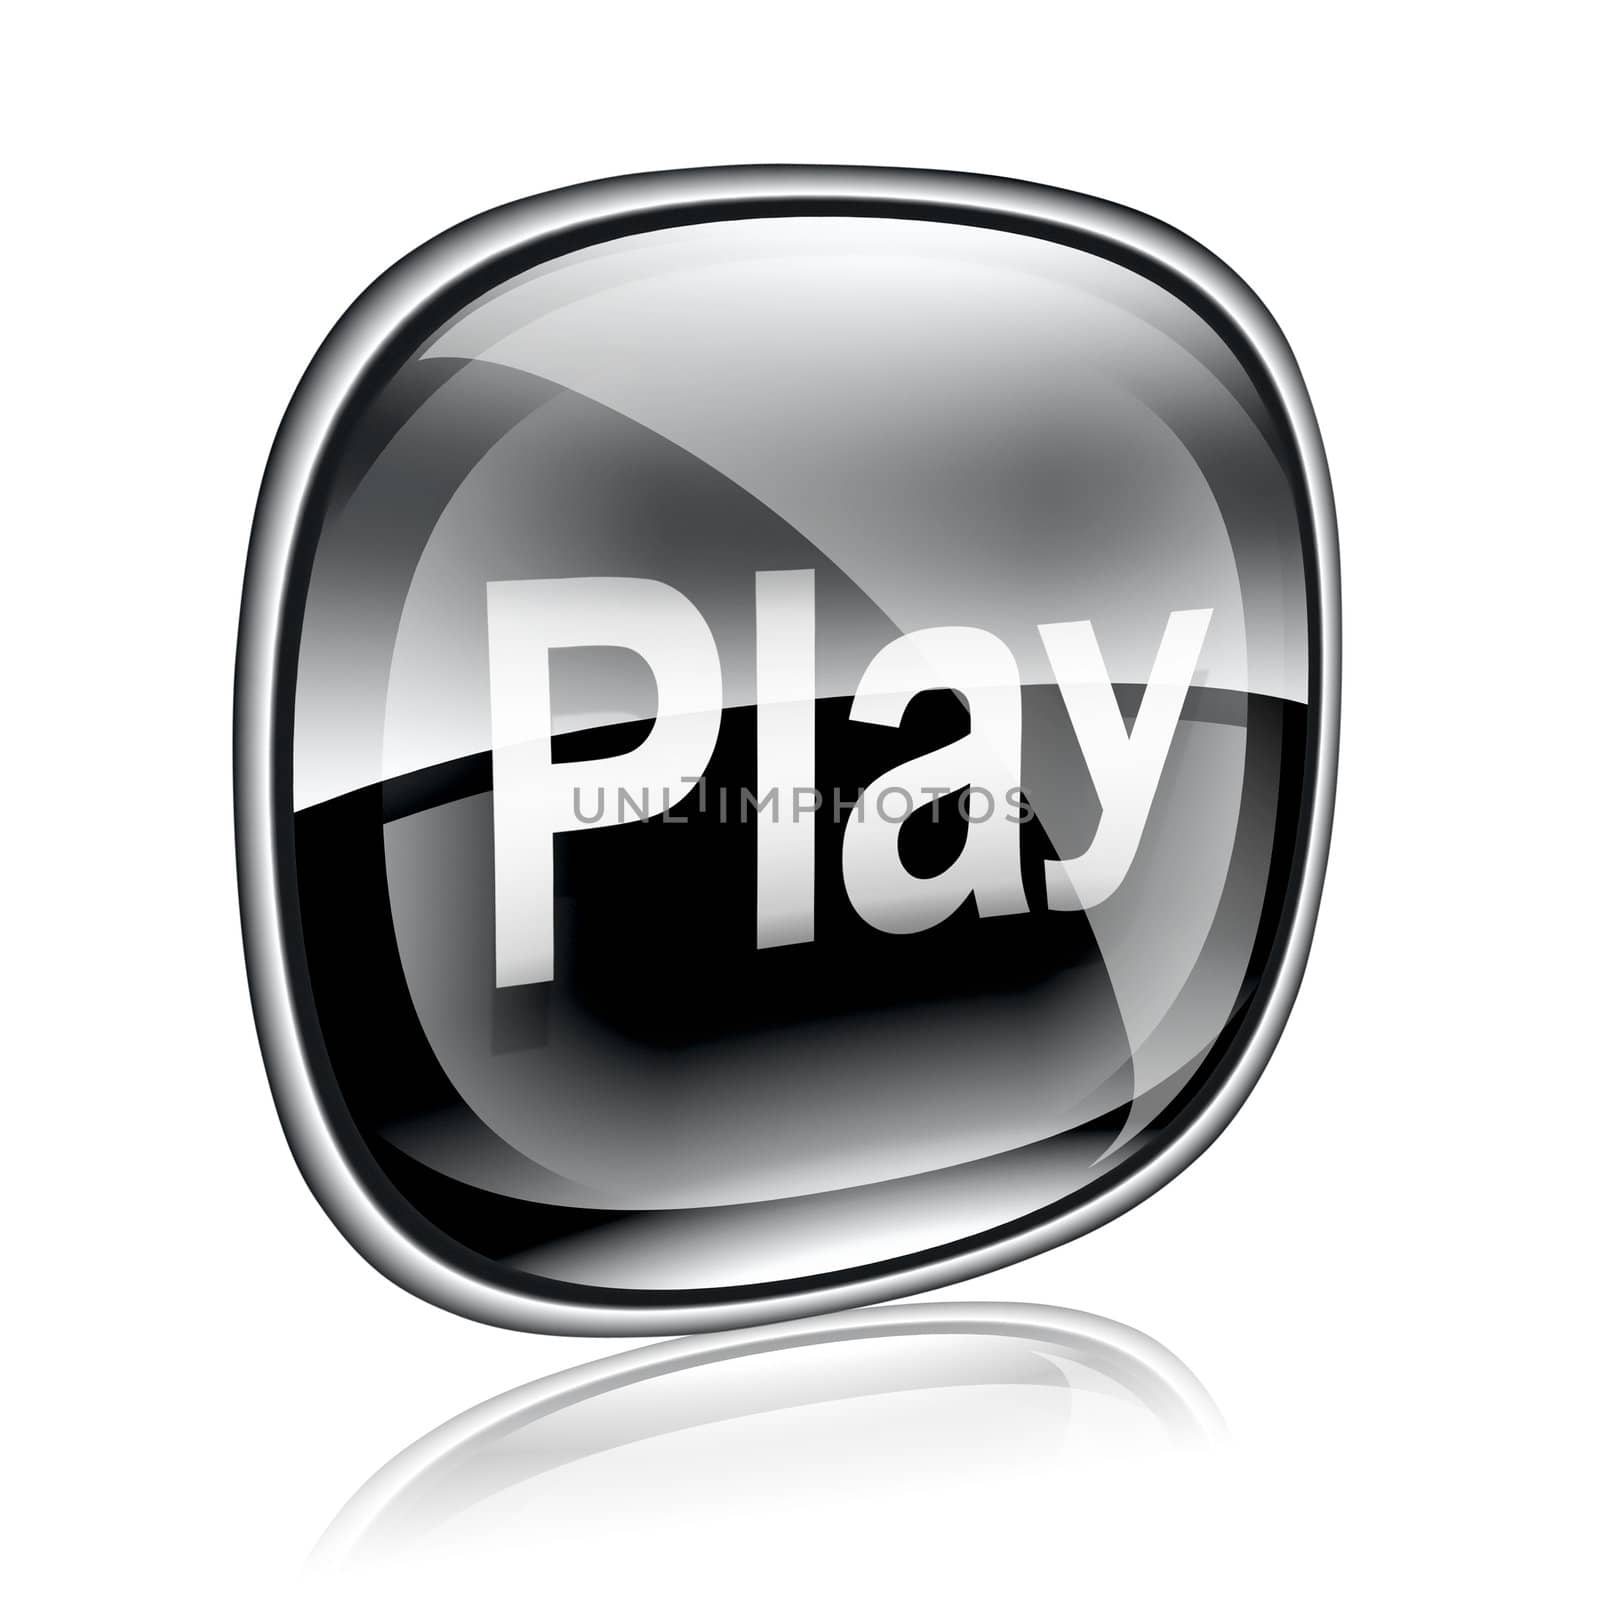 Play icon black glass, isolated on white background